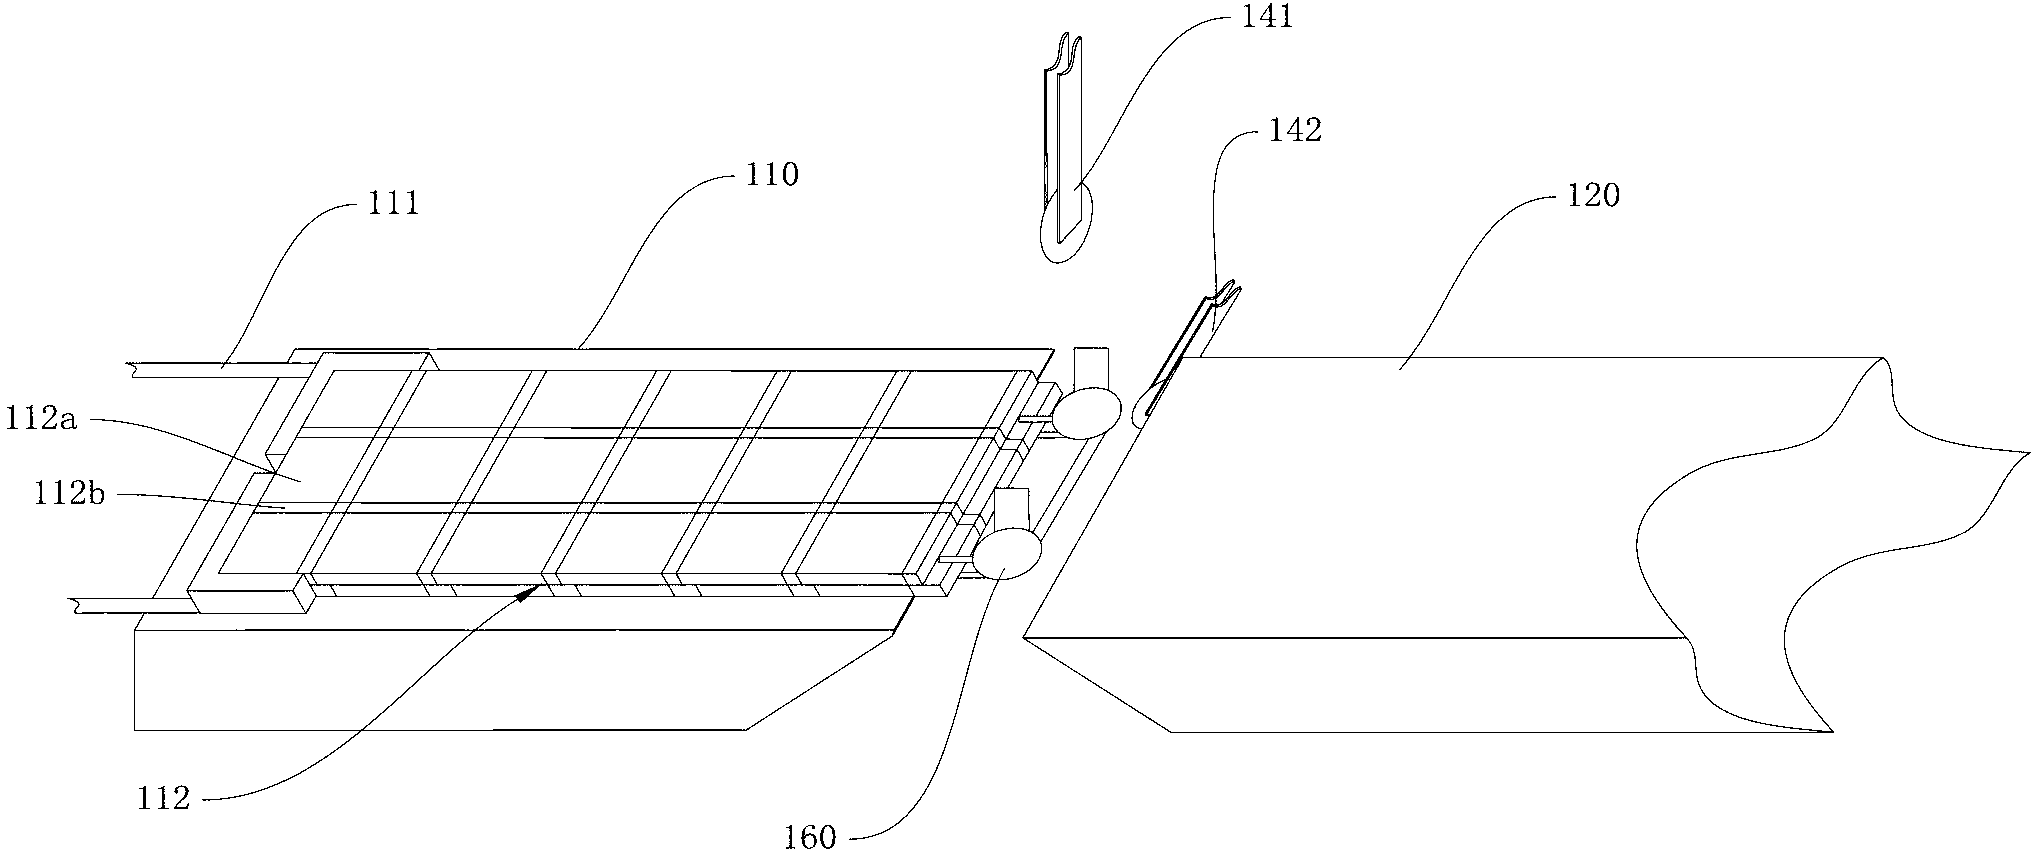 Glass substrate cutting system